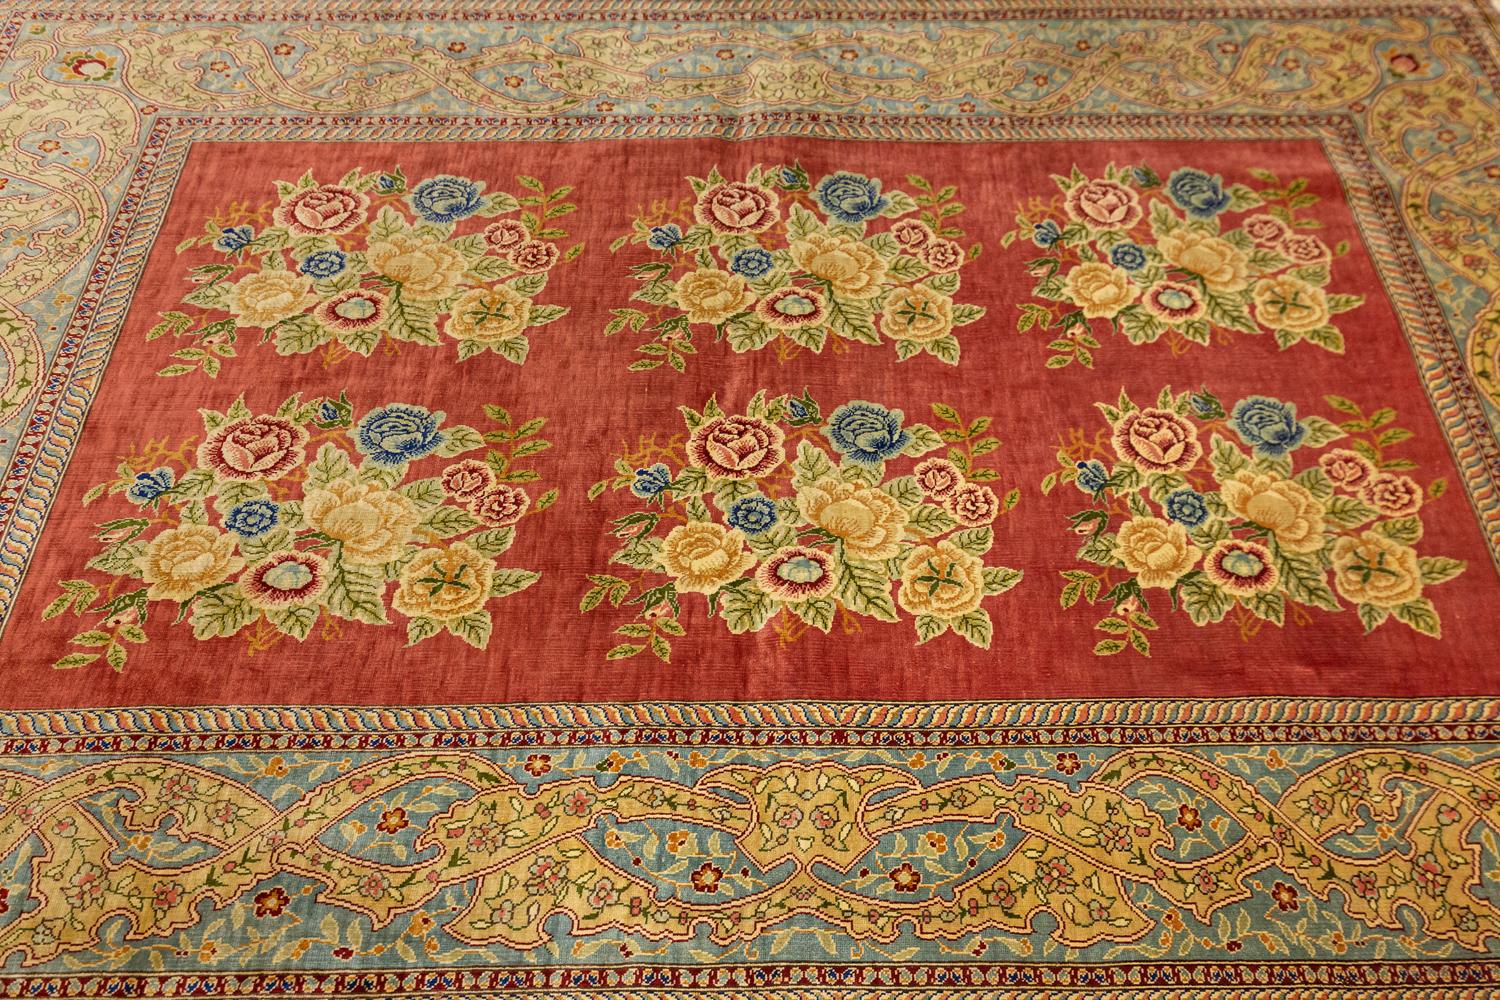 This is a semi-antique Hereke silk and metal threaded rug woven in Turkey during the last quarter of the 20th century circa 1970-2000's and measures 141 x 90CM in size. Its field is made up of two rows of bouquets with different blossoming flowers